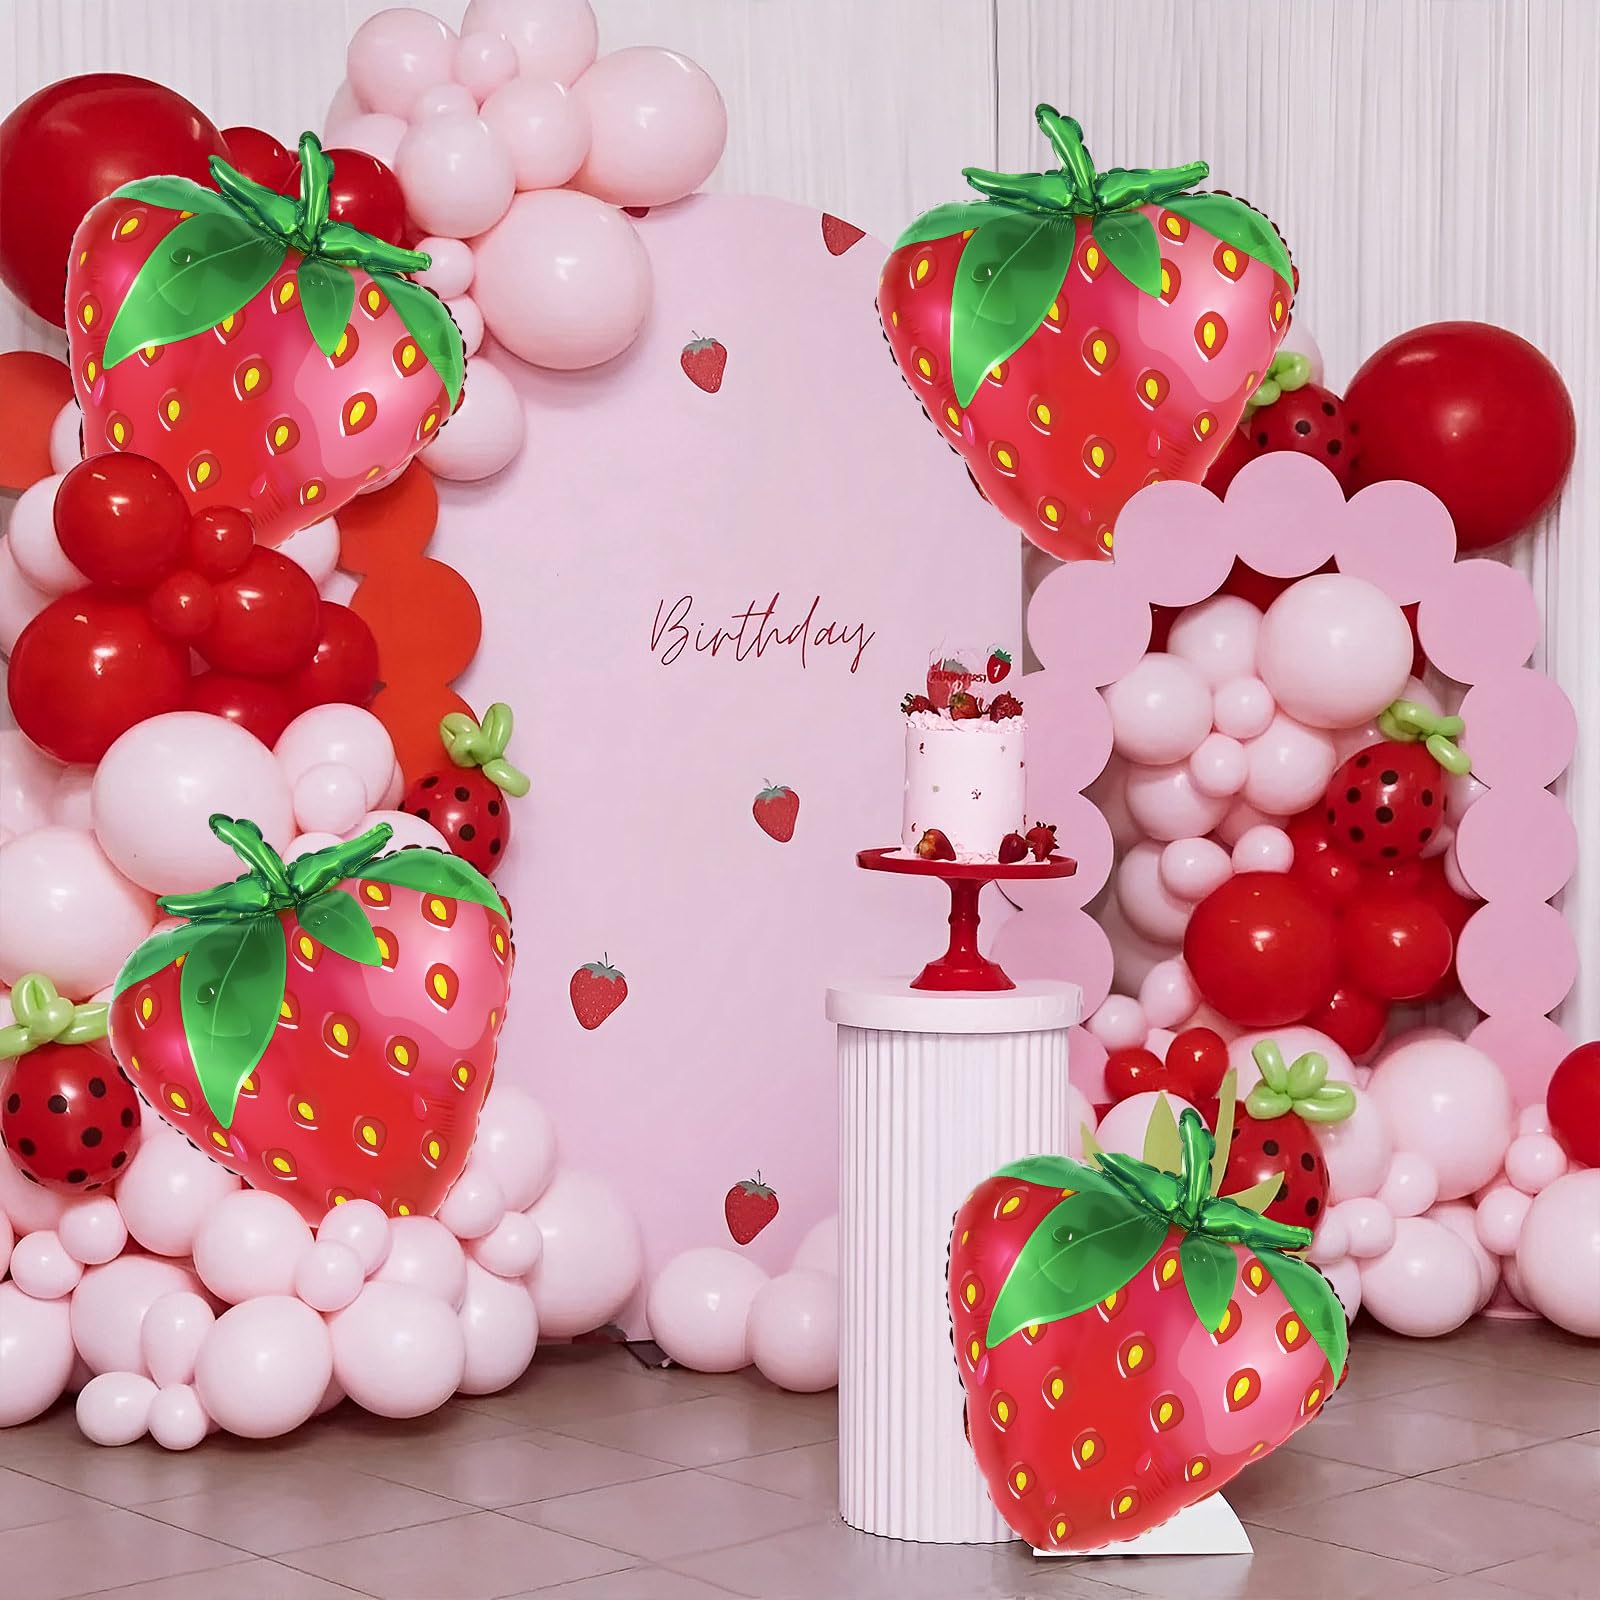 Strawberry Balloons, 6 Pcs Sweet Fruit Balloons for Birthday Party Decorations, Strawberry Foil Balloons for Strawberry Themed Party Baby Shower Gender Reveal